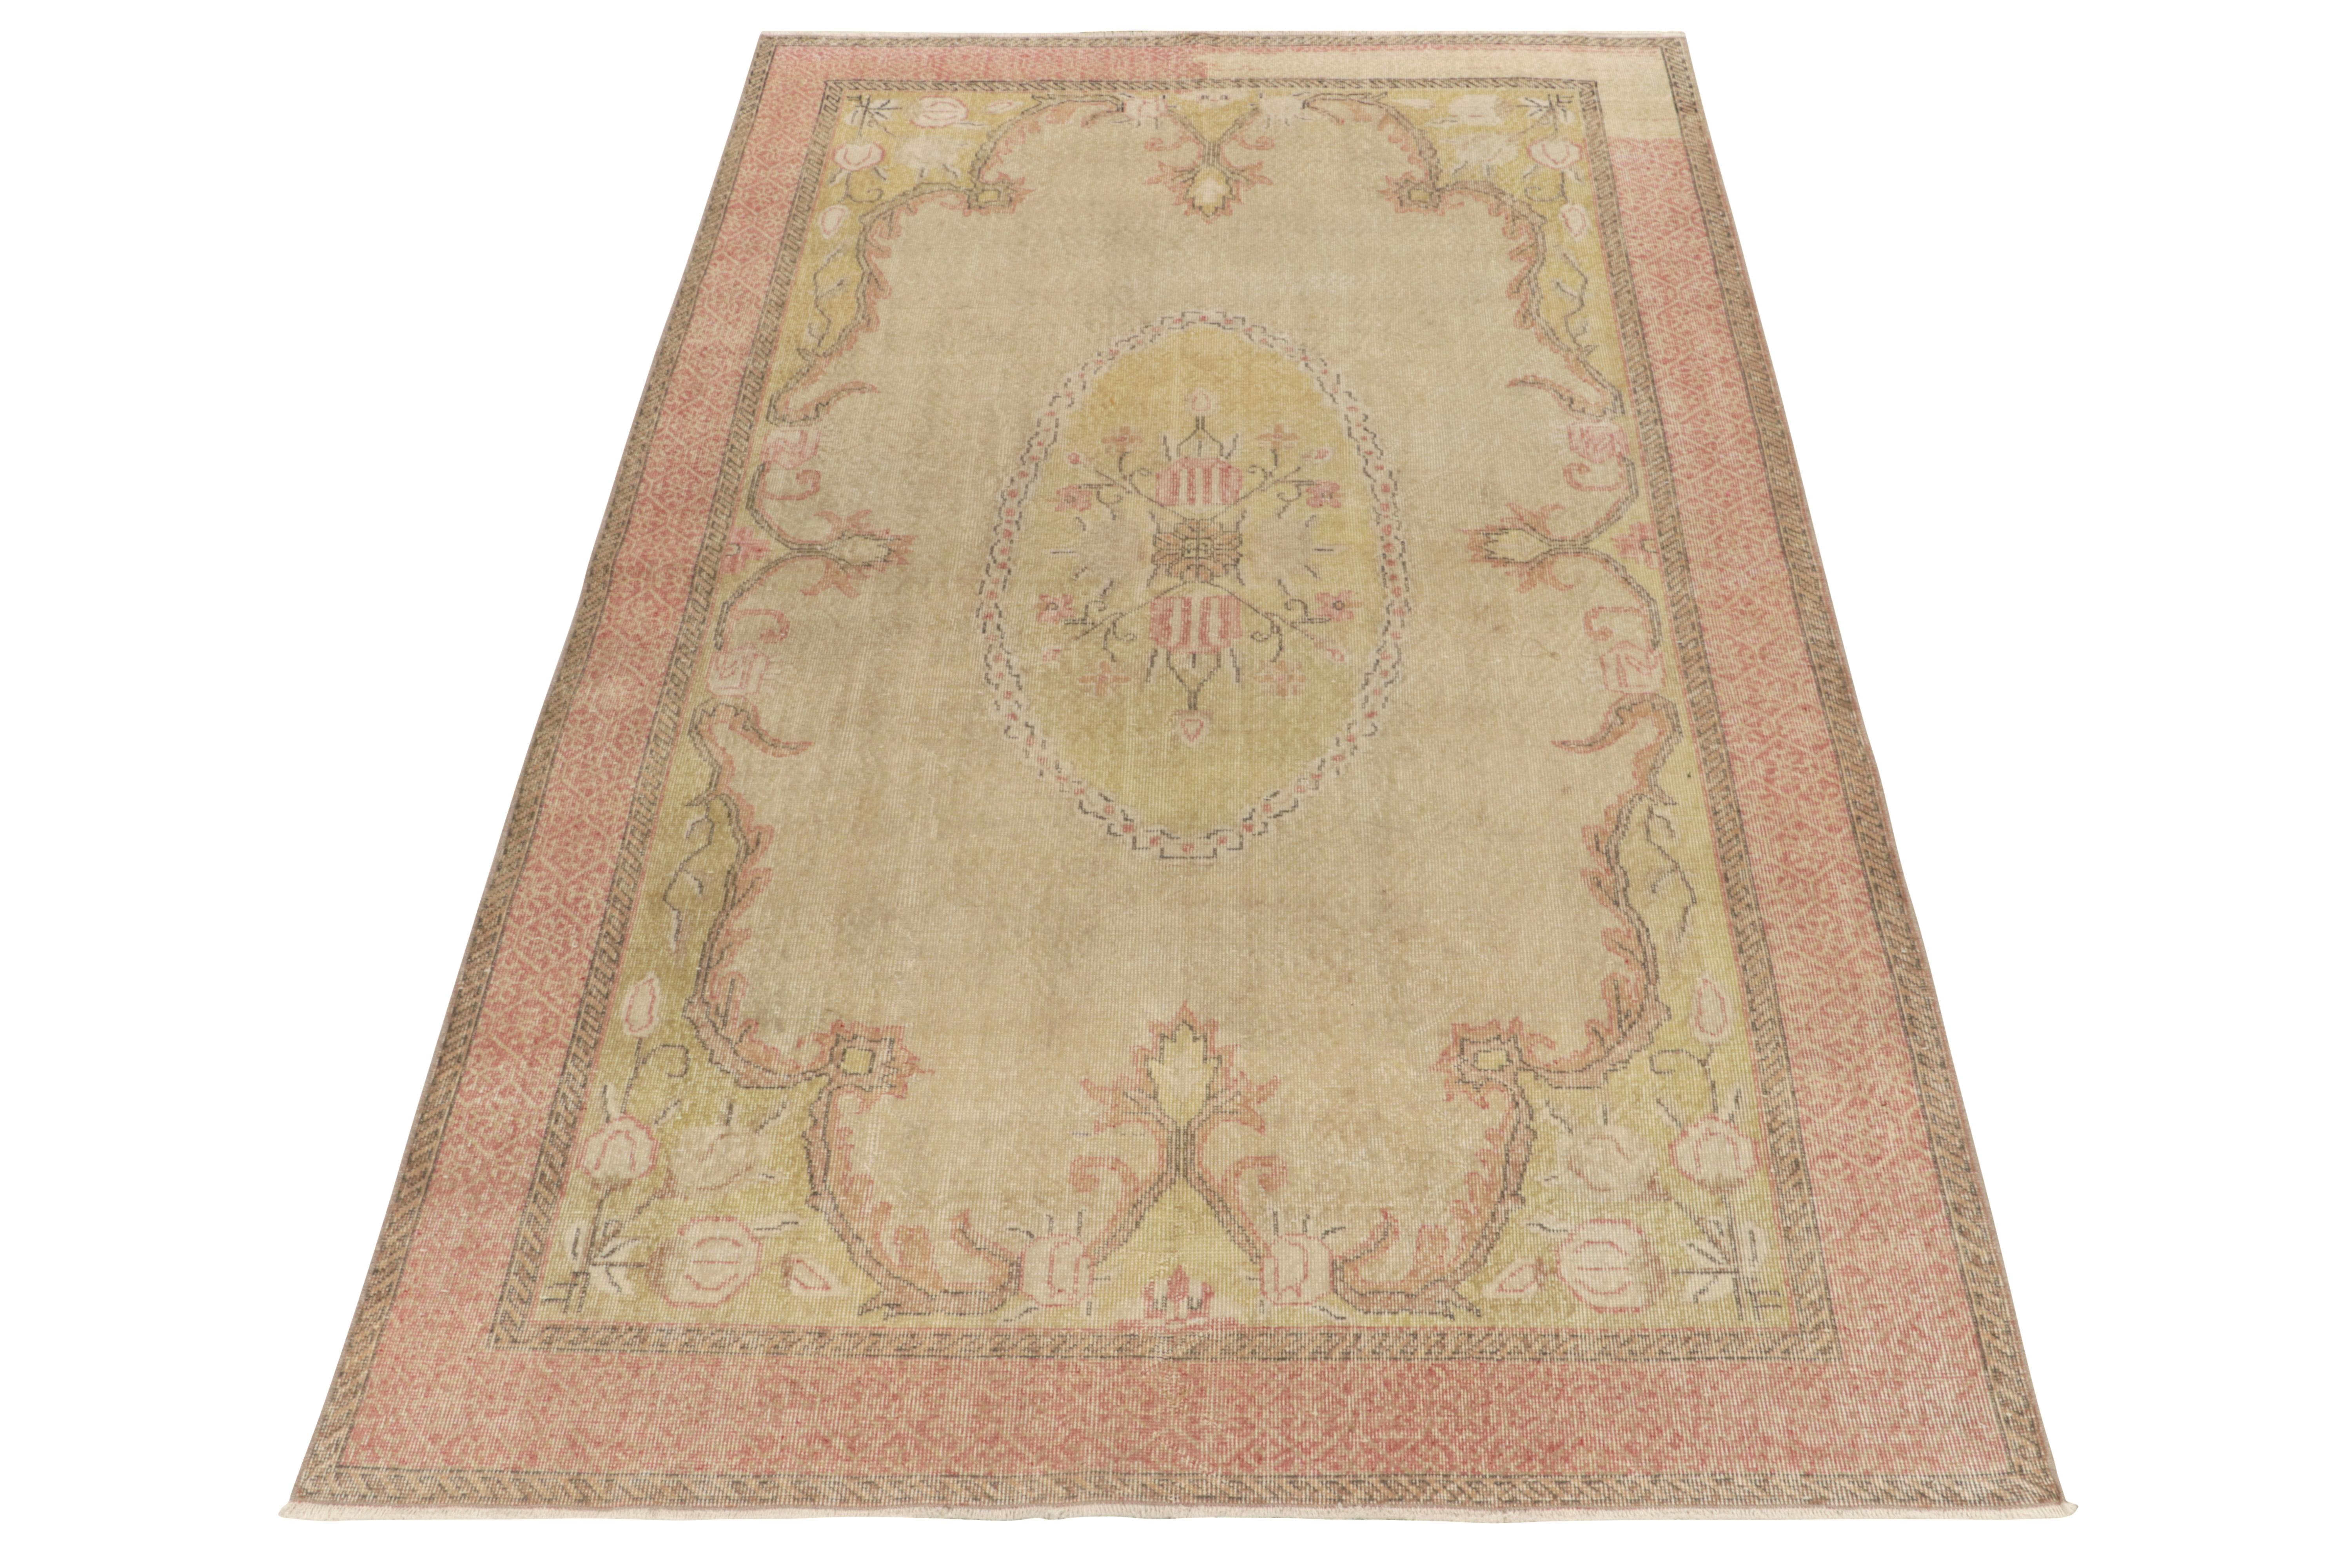 Hand-knotted in wool, a vintage 7x10 rug from a coveted Turkish designer, is commemorated in Rug & Kilim’s Mid-Century Pasha Collection. 

The delicious 1960s piece witnesses floral patterns in beige and pink with an impossible subdued accent as